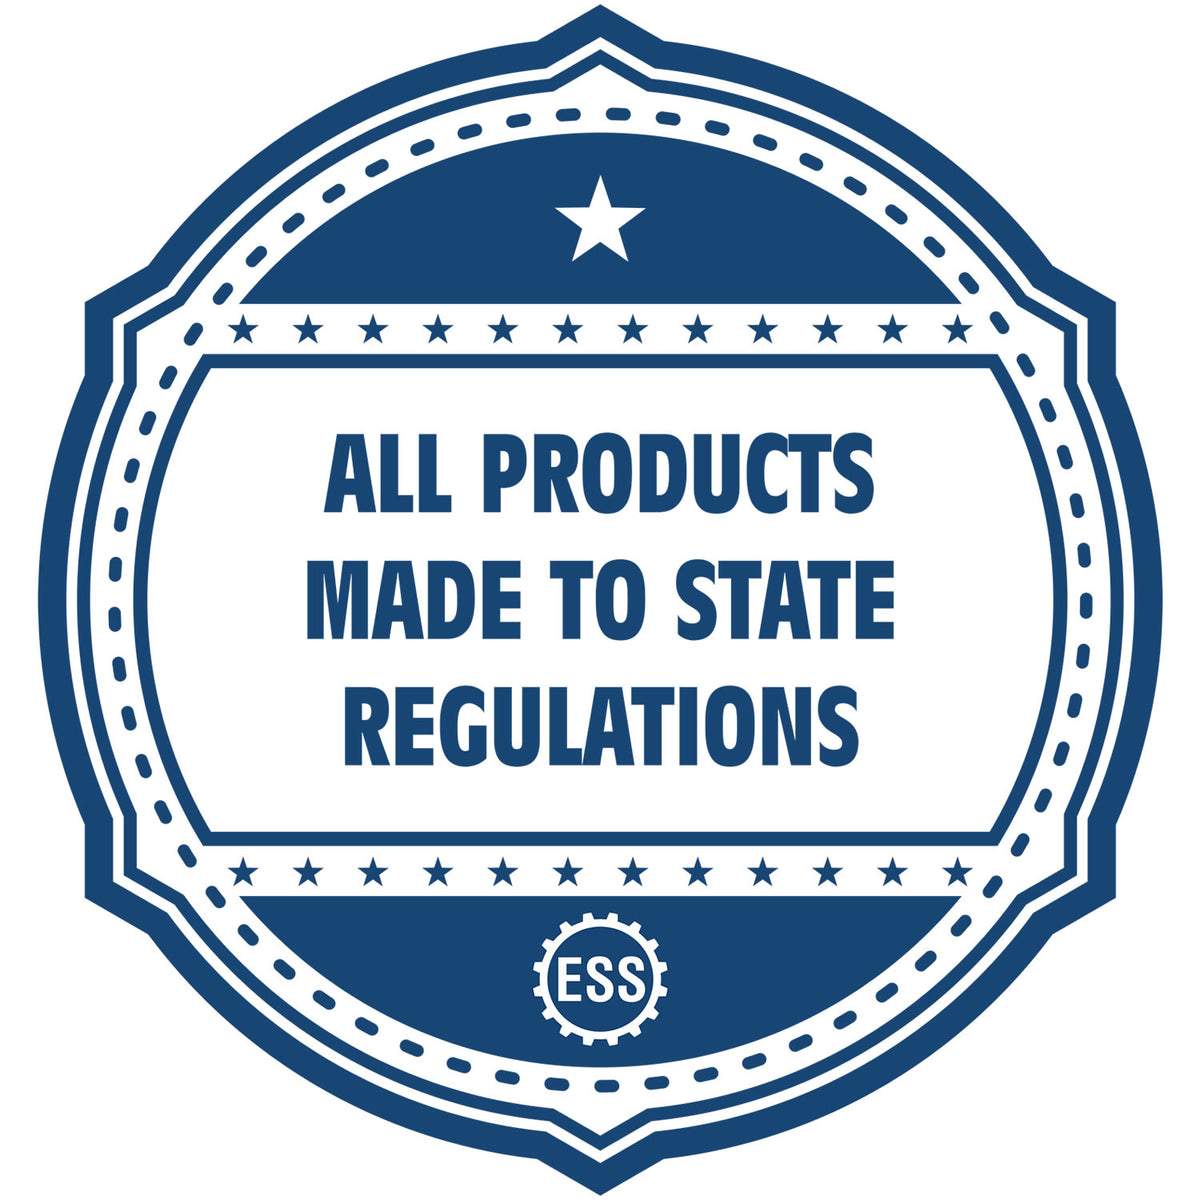 An icon or badge element for the State of Massachusetts Extended Long Reach Engineer Seal showing that this product is made in compliance with state regulations.